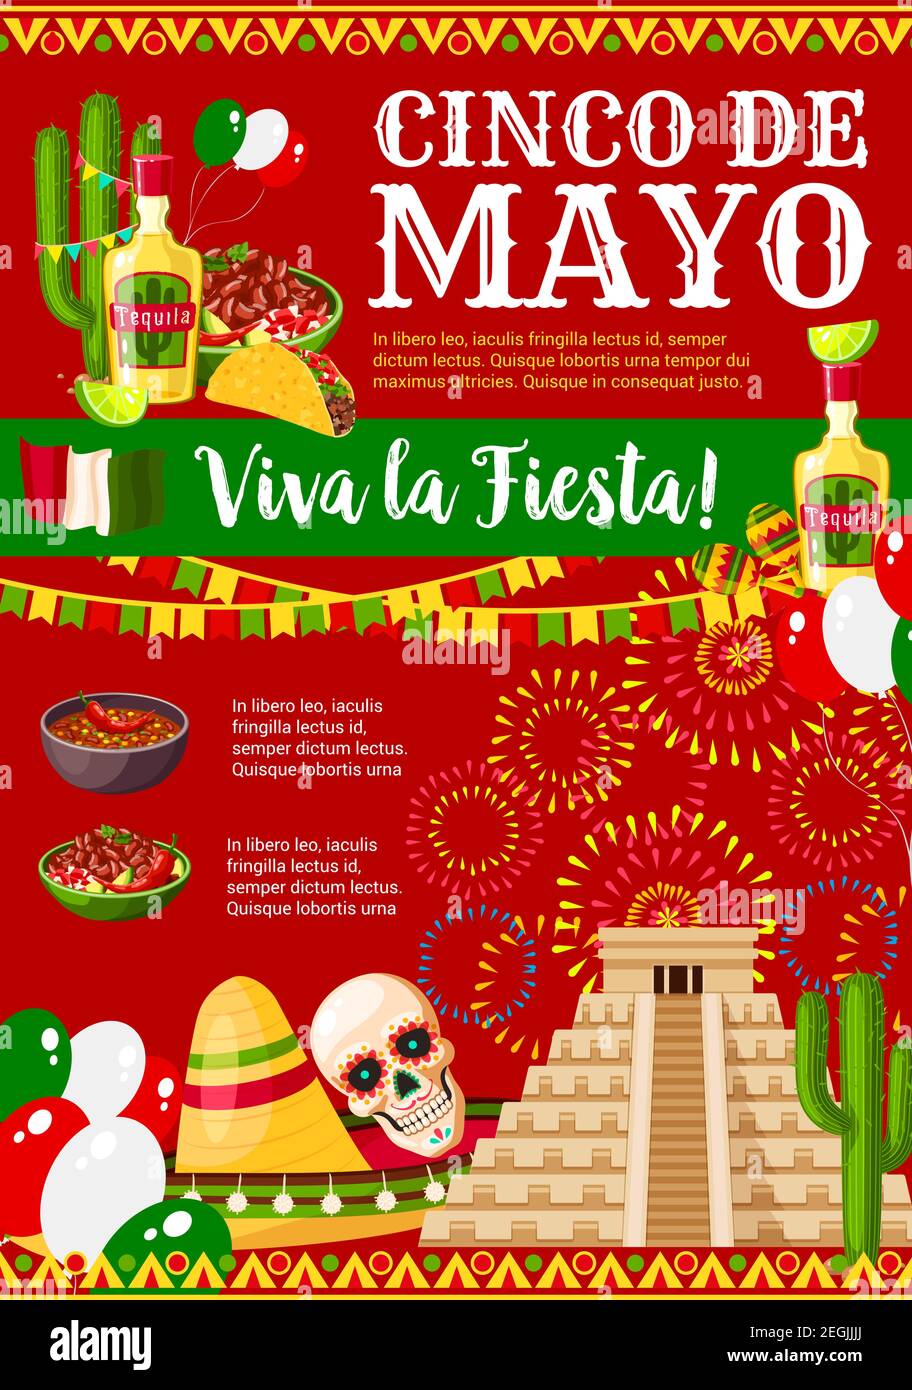 Cinco de Mayo greeting card for Mexican holiday fiesta party celebration of traditional symbols jalapeno pepper, sombrero and tequila or skull. Vector Stock Vector